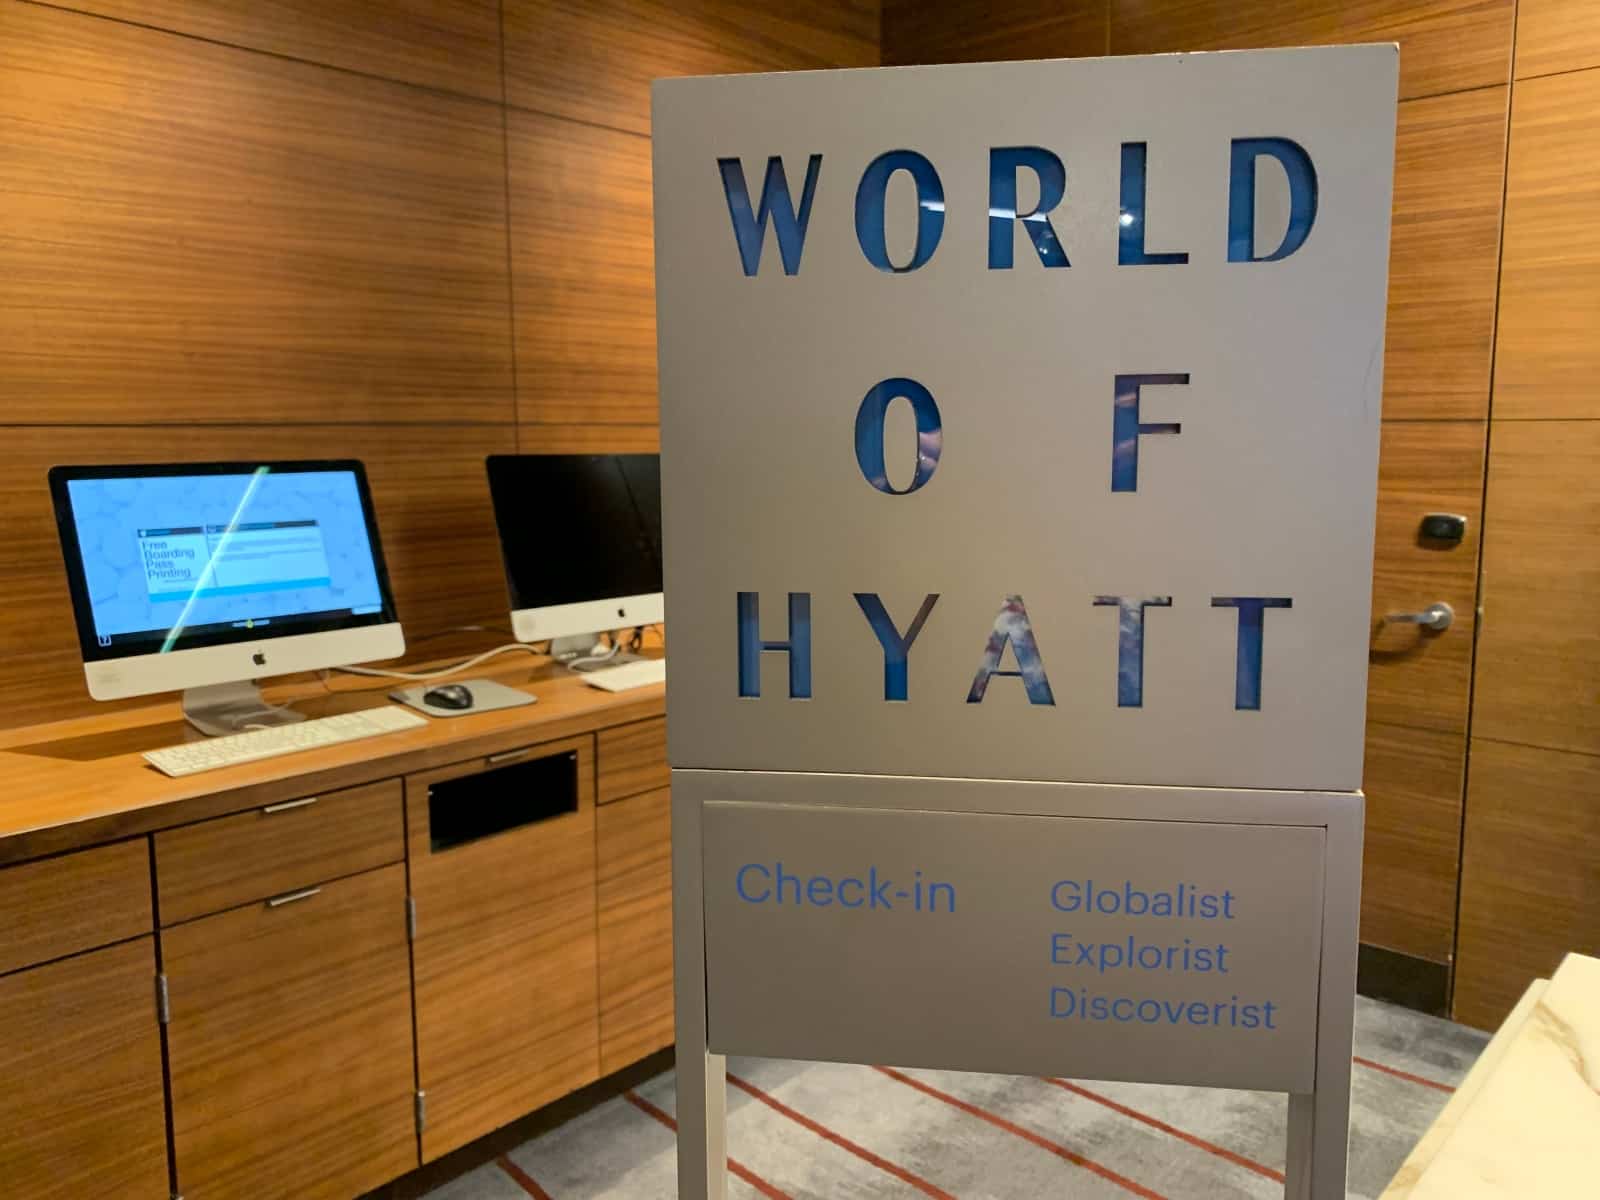 <p><span>World of Hyatt is celebrated for its reward point system and user-friendly rewards structure. As a member, you earn points for hotel stays and dining and spa services at Hyatt properties worldwide. These points can be redeemed for free nights, room upgrades, and unique experiences like private dinners.</span></p> <p><span>The program is particularly generous for elite members, offering perks such as bonus points on stays, premium internet access, and room availability guarantees. Hyatt’s partnership with airlines also means you can convert your hotel points into airline miles, giving you more flexibility in using your rewards. </span></p> <p><b>Insider’s Tip: </b><span>Take advantage of Hyatt’s airline partnerships to earn miles on your stay.</span></p>